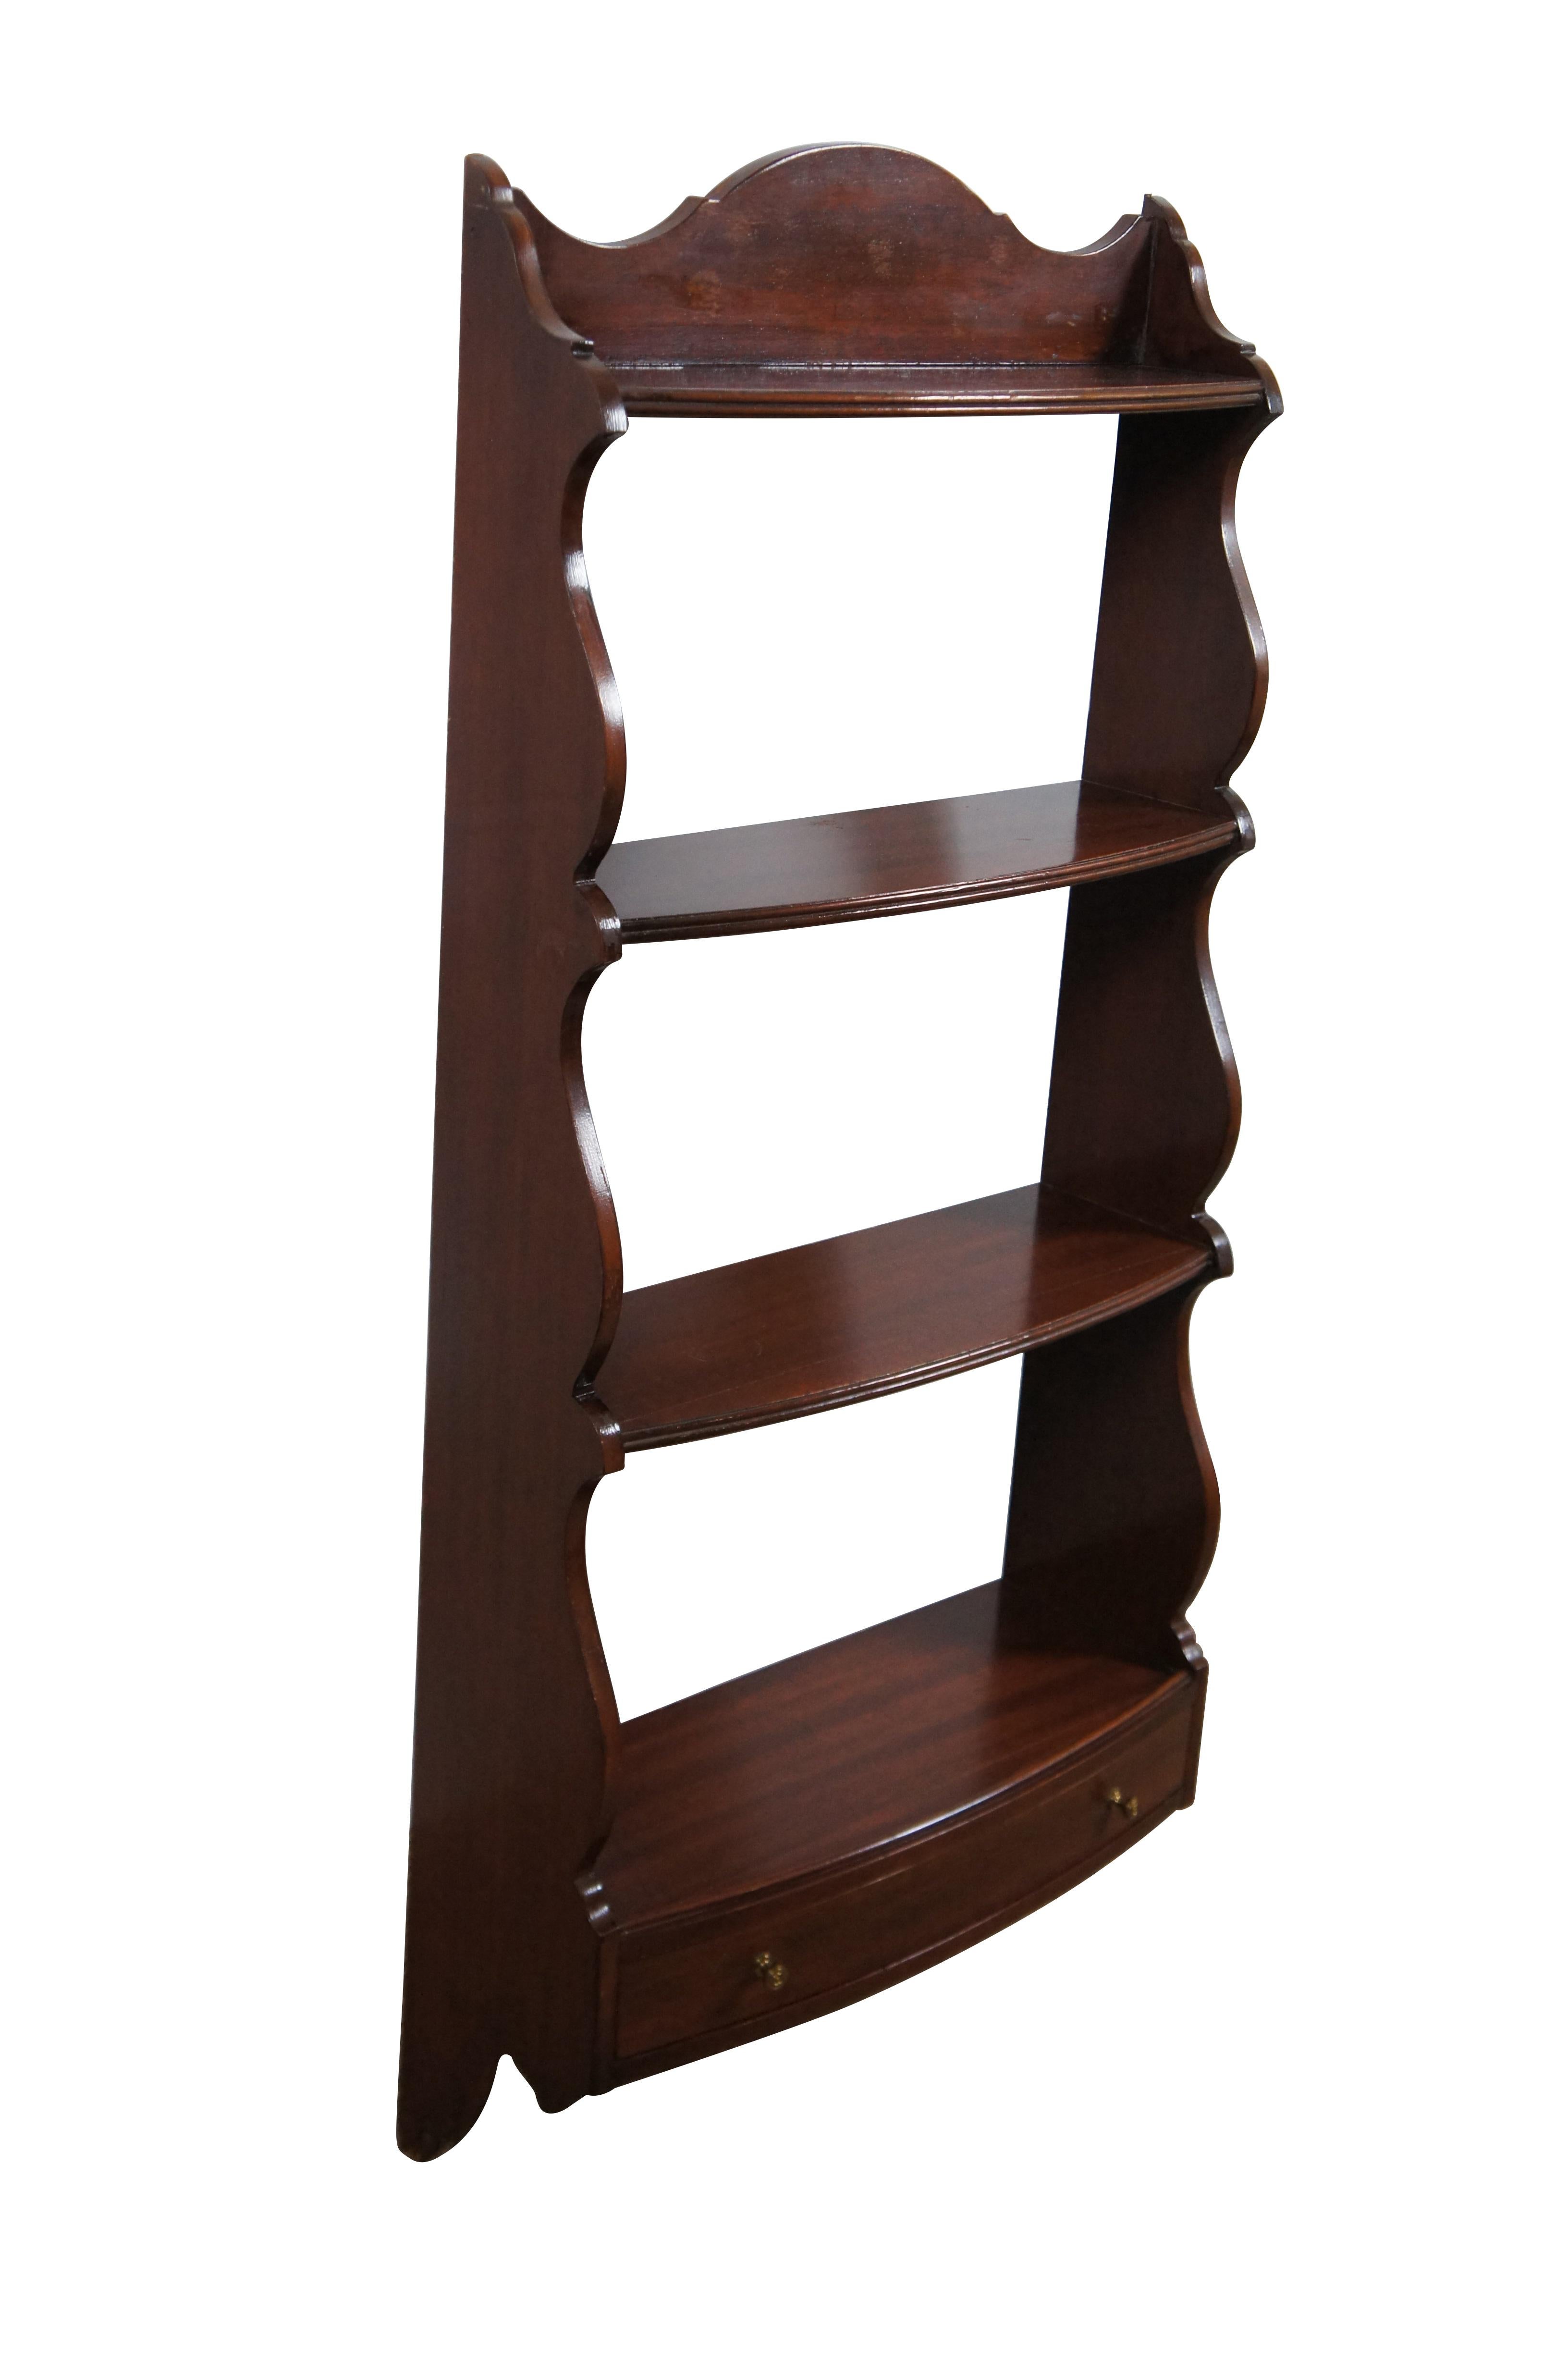 Large vintage mahogany wall hanging display shelf / curio featuring four shelves framed with serpentine sides, oxbow backsplash on top, and a bow front drawer with brass handles.

Dimensions:
16